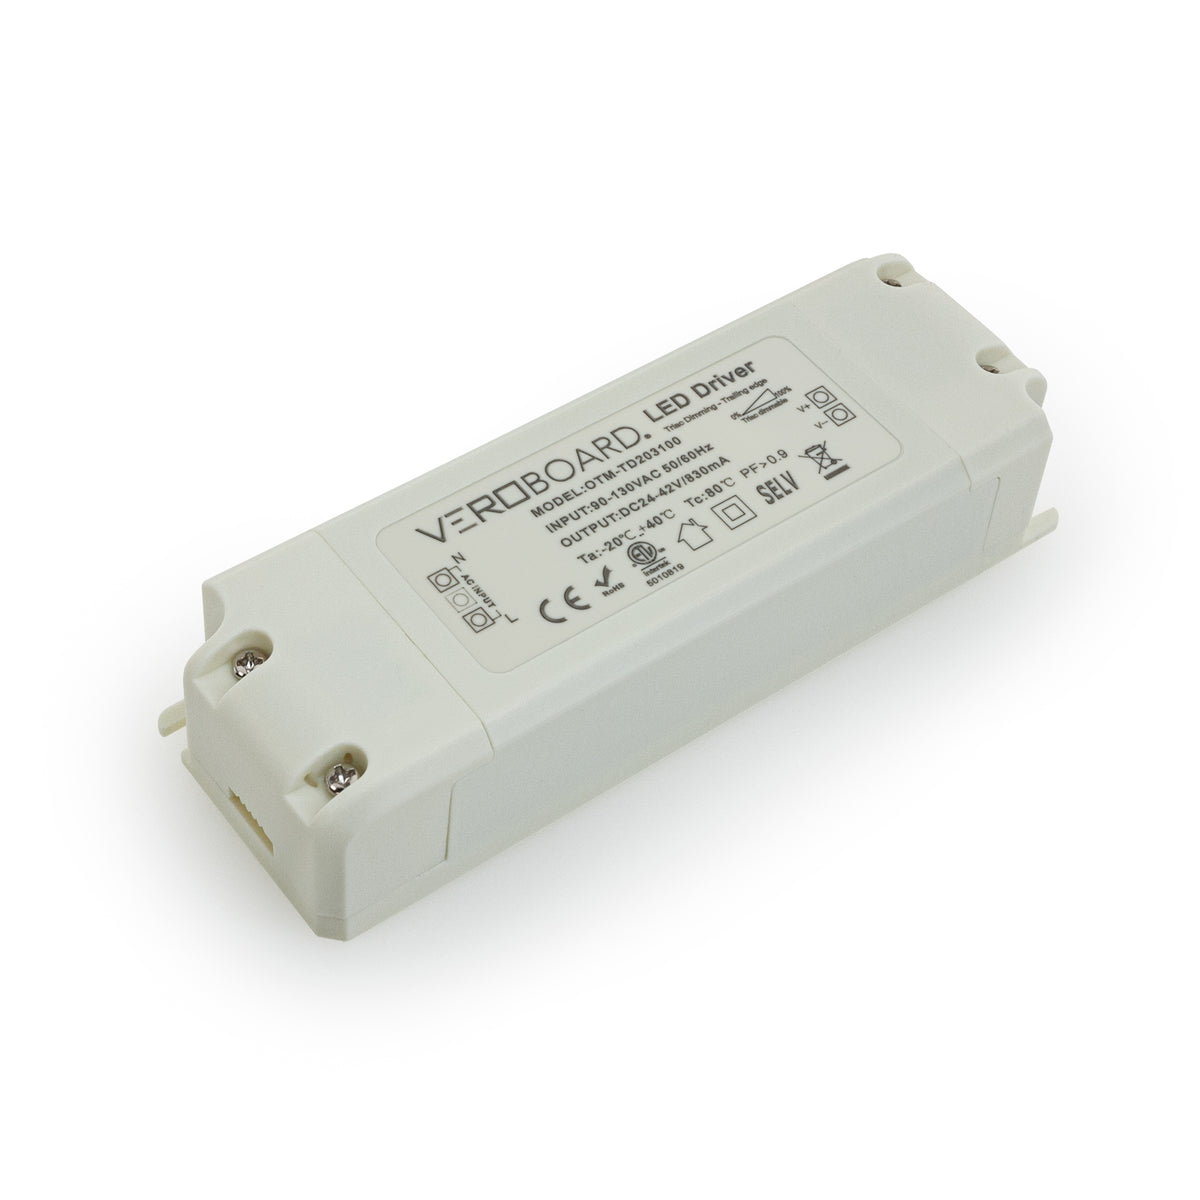 Constant Current 830ma 24-42V 30W Dimmable OTM-TD203100-830-30, Veroboard